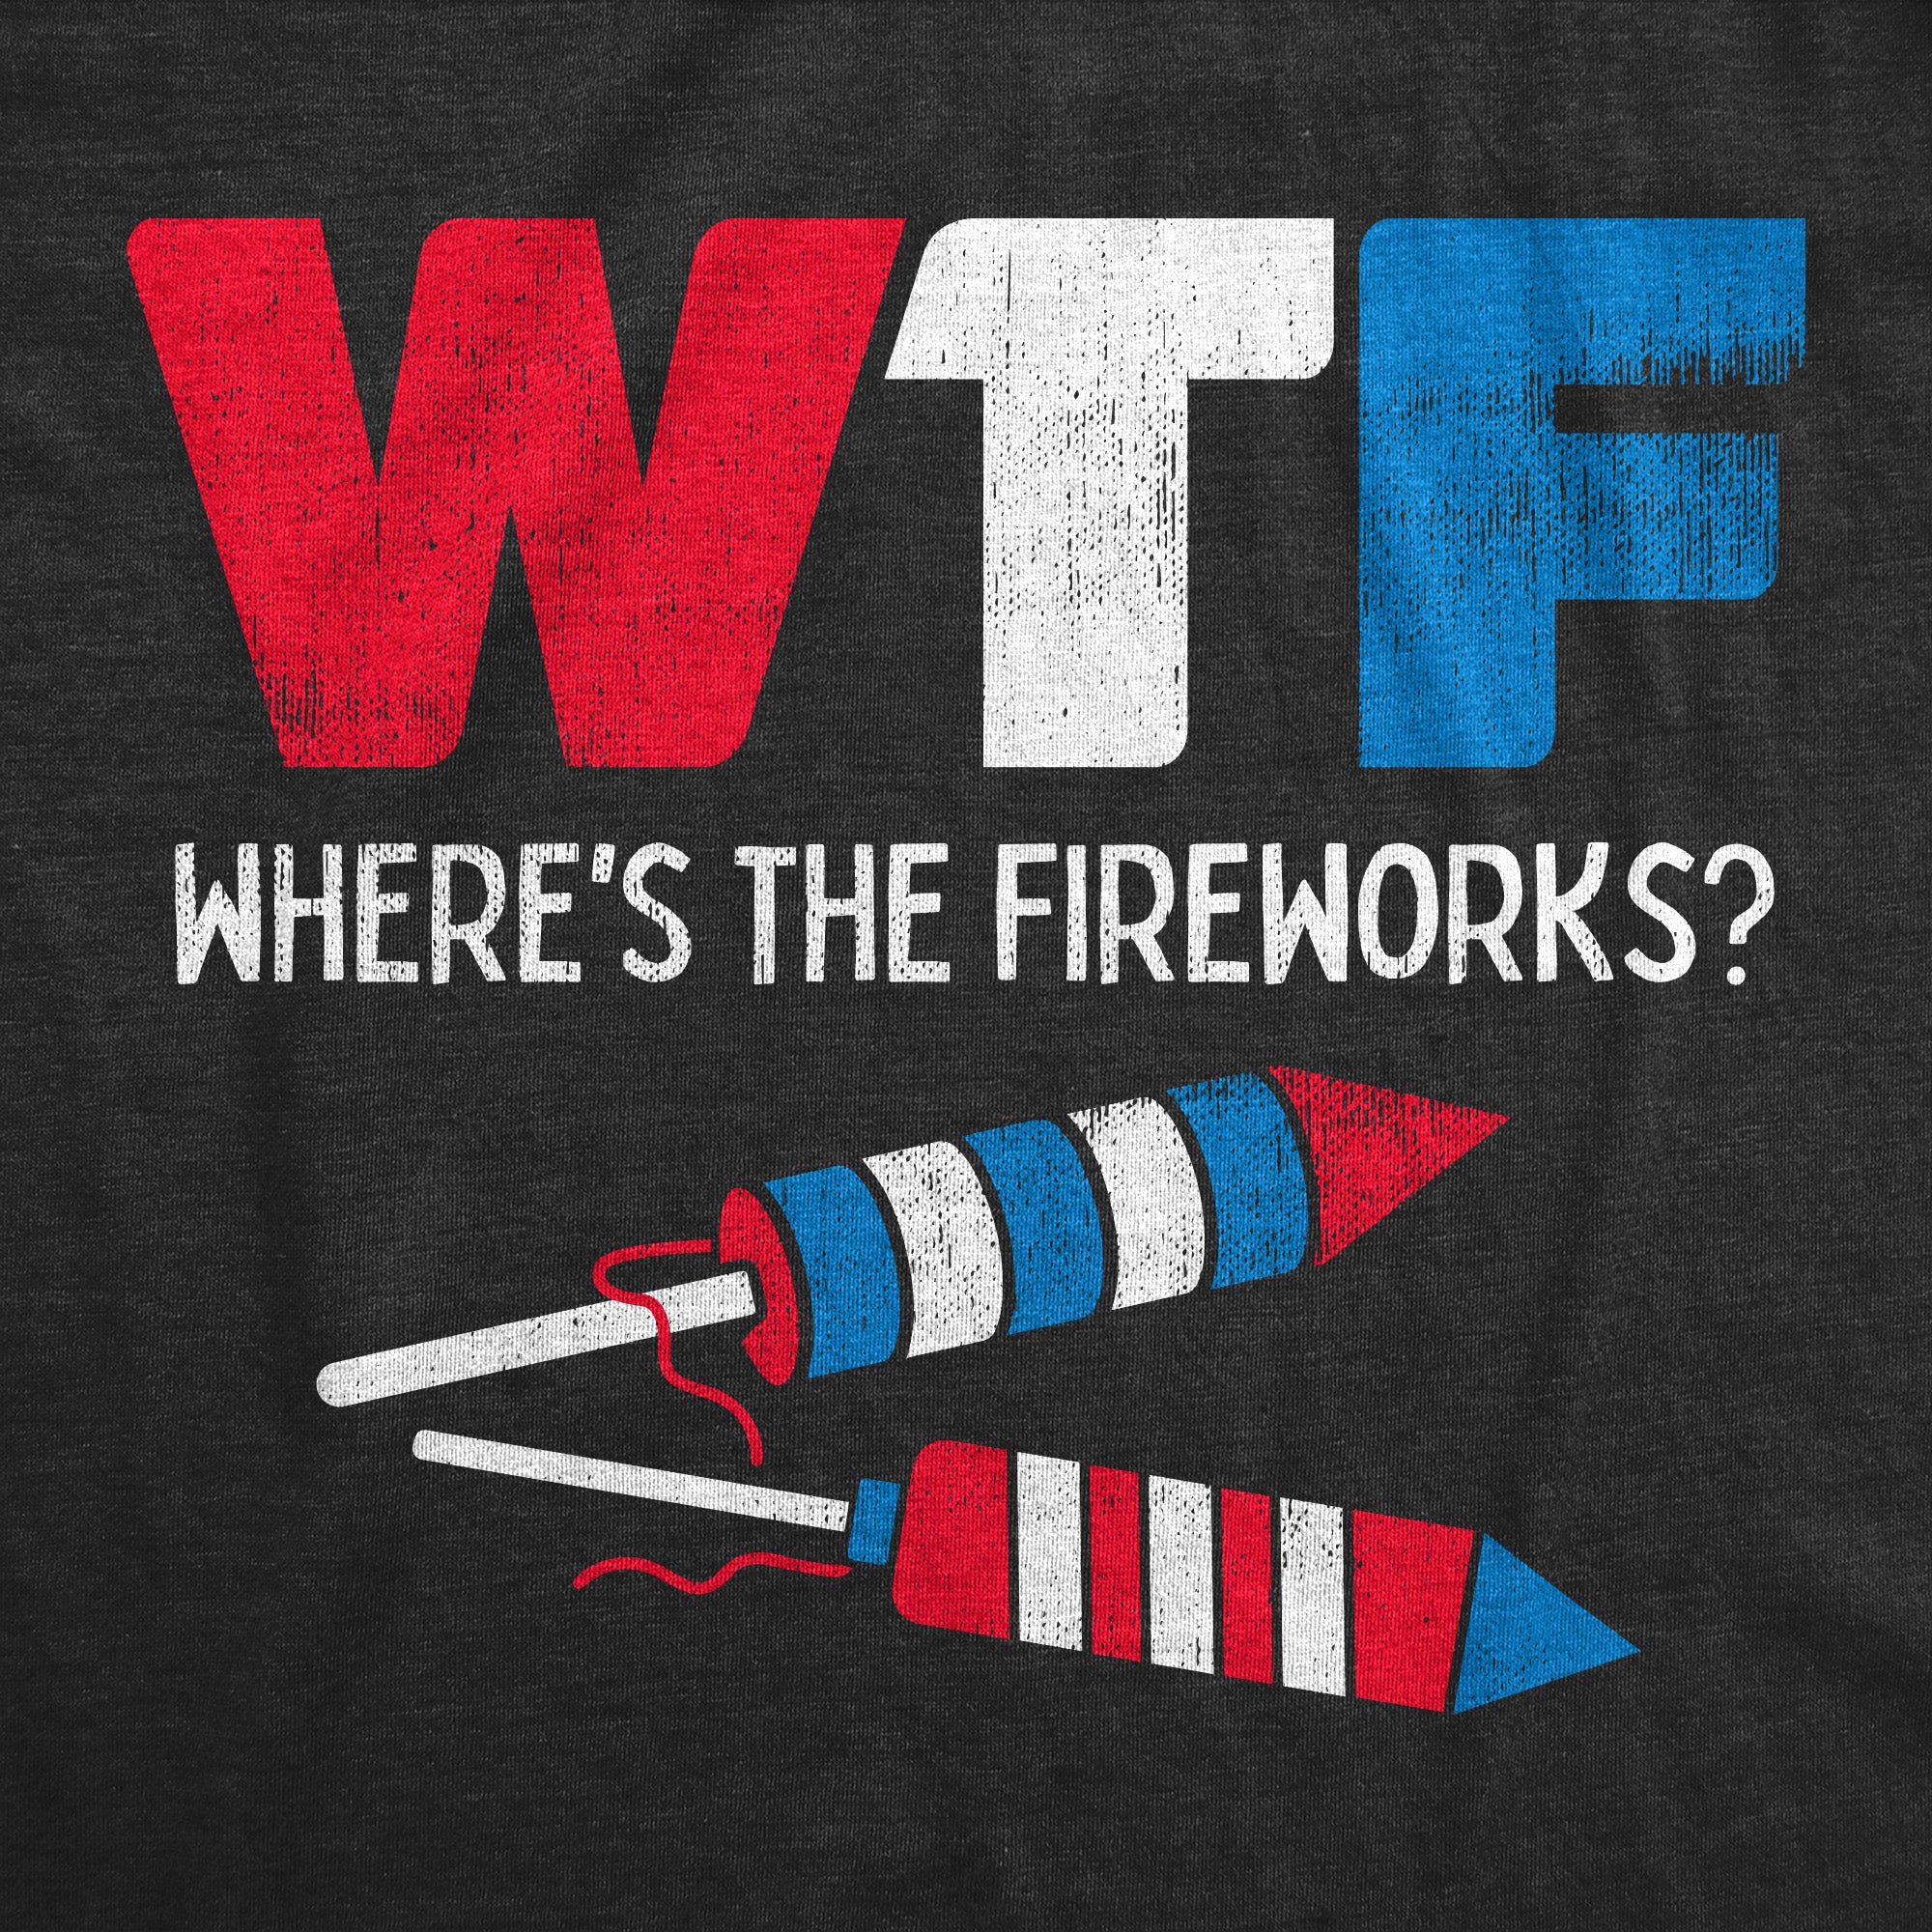 Funny Heather Black - WTF WTF Wheres The Fireworks Womens T Shirt Nerdy Fourth Of July Tee